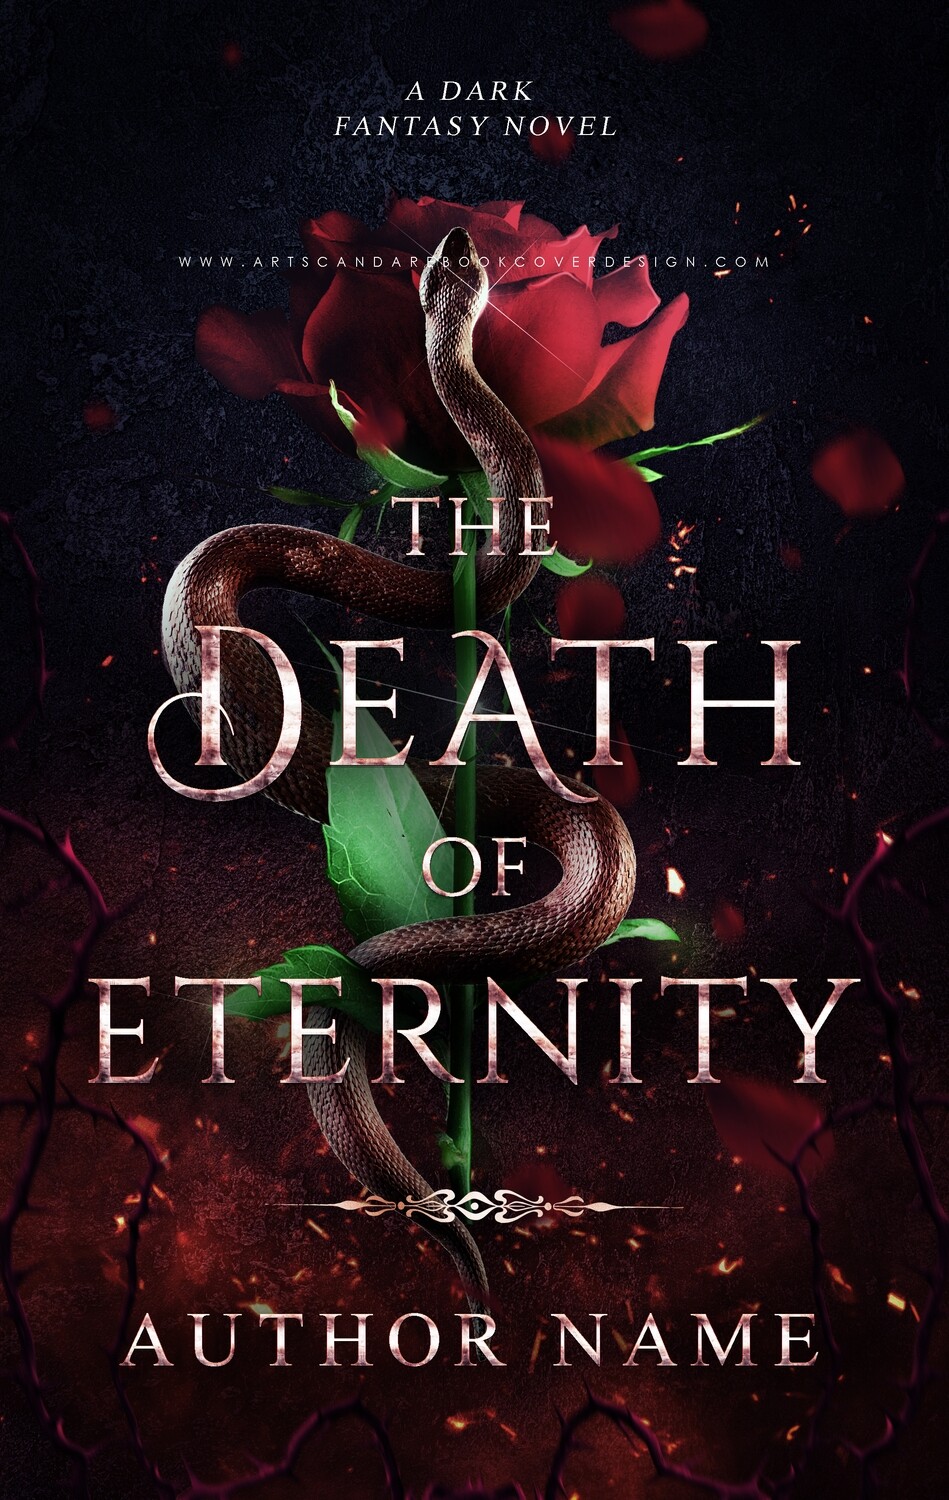 Ebook: The Death of Eternity